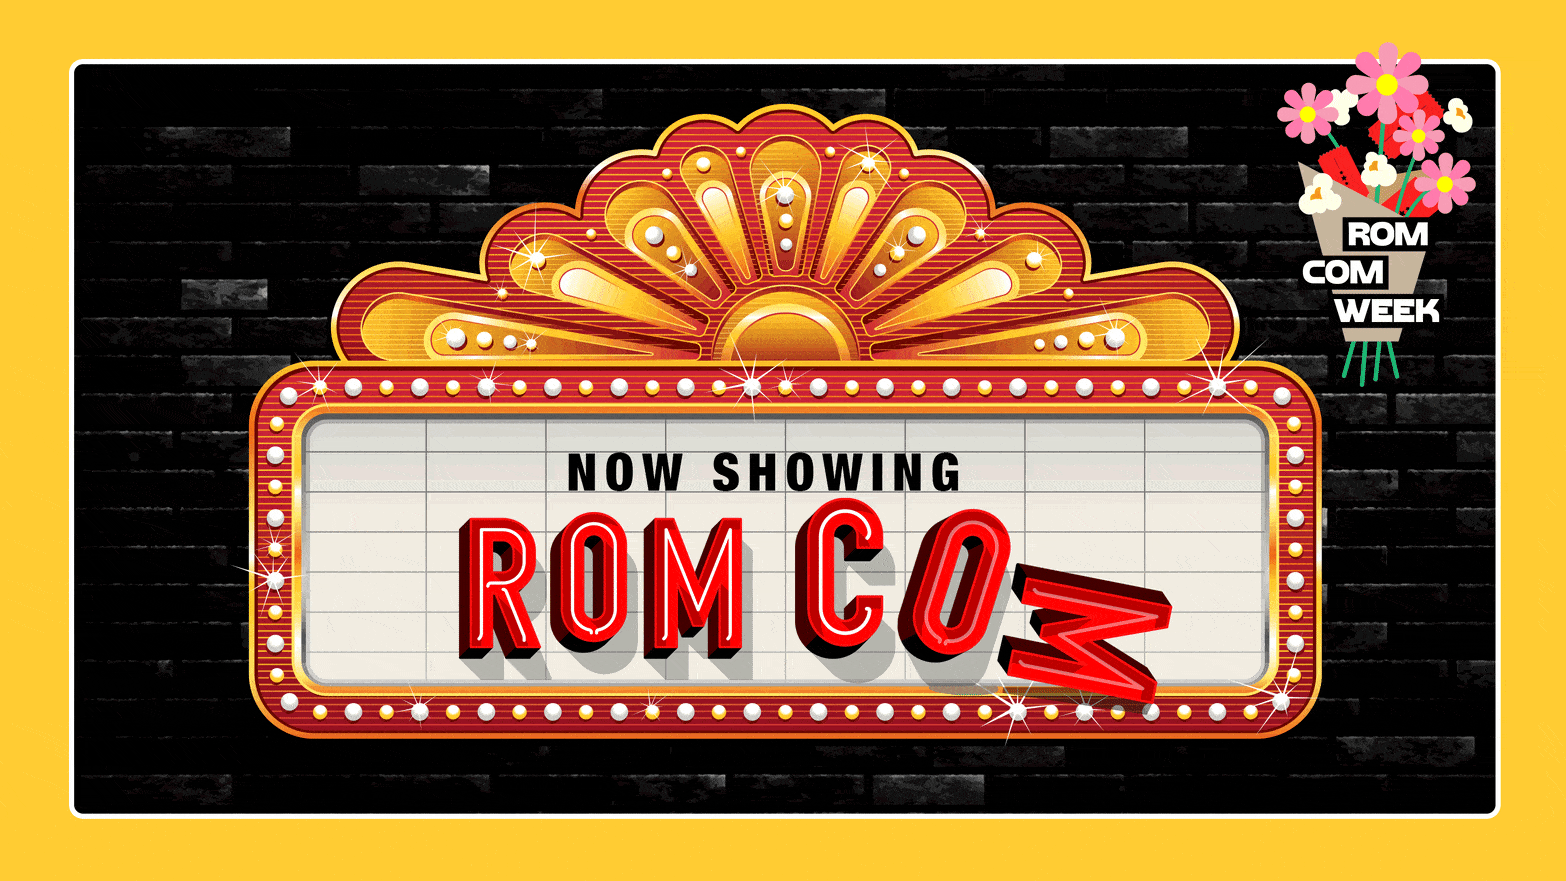 A photo illustration of a theater marquee with the words “Now showing Rom Com” on it with the “Com” part falling off